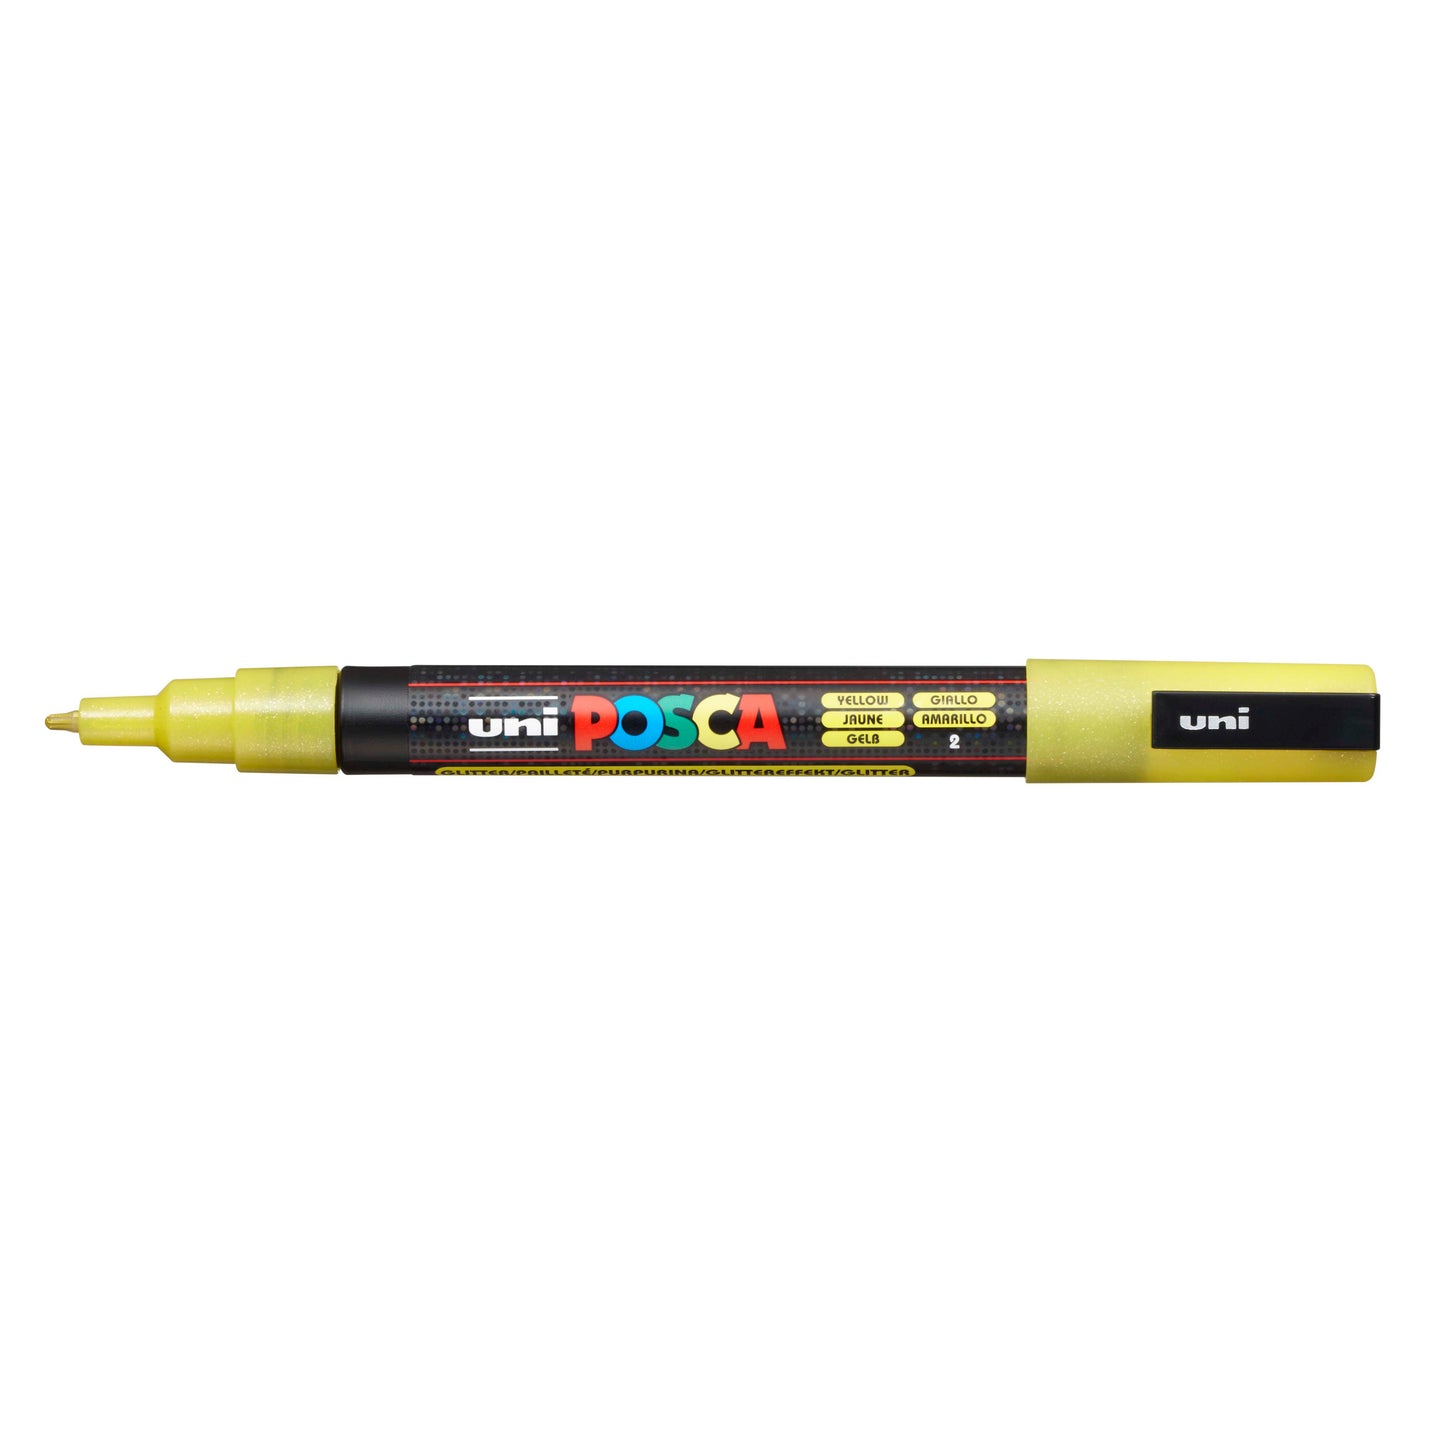 POSCA Acrylic Paint Markers - PC-3M 0.9-1.3mm Bullet Tip - Yellow by POSCA - K. A. Artist Shop